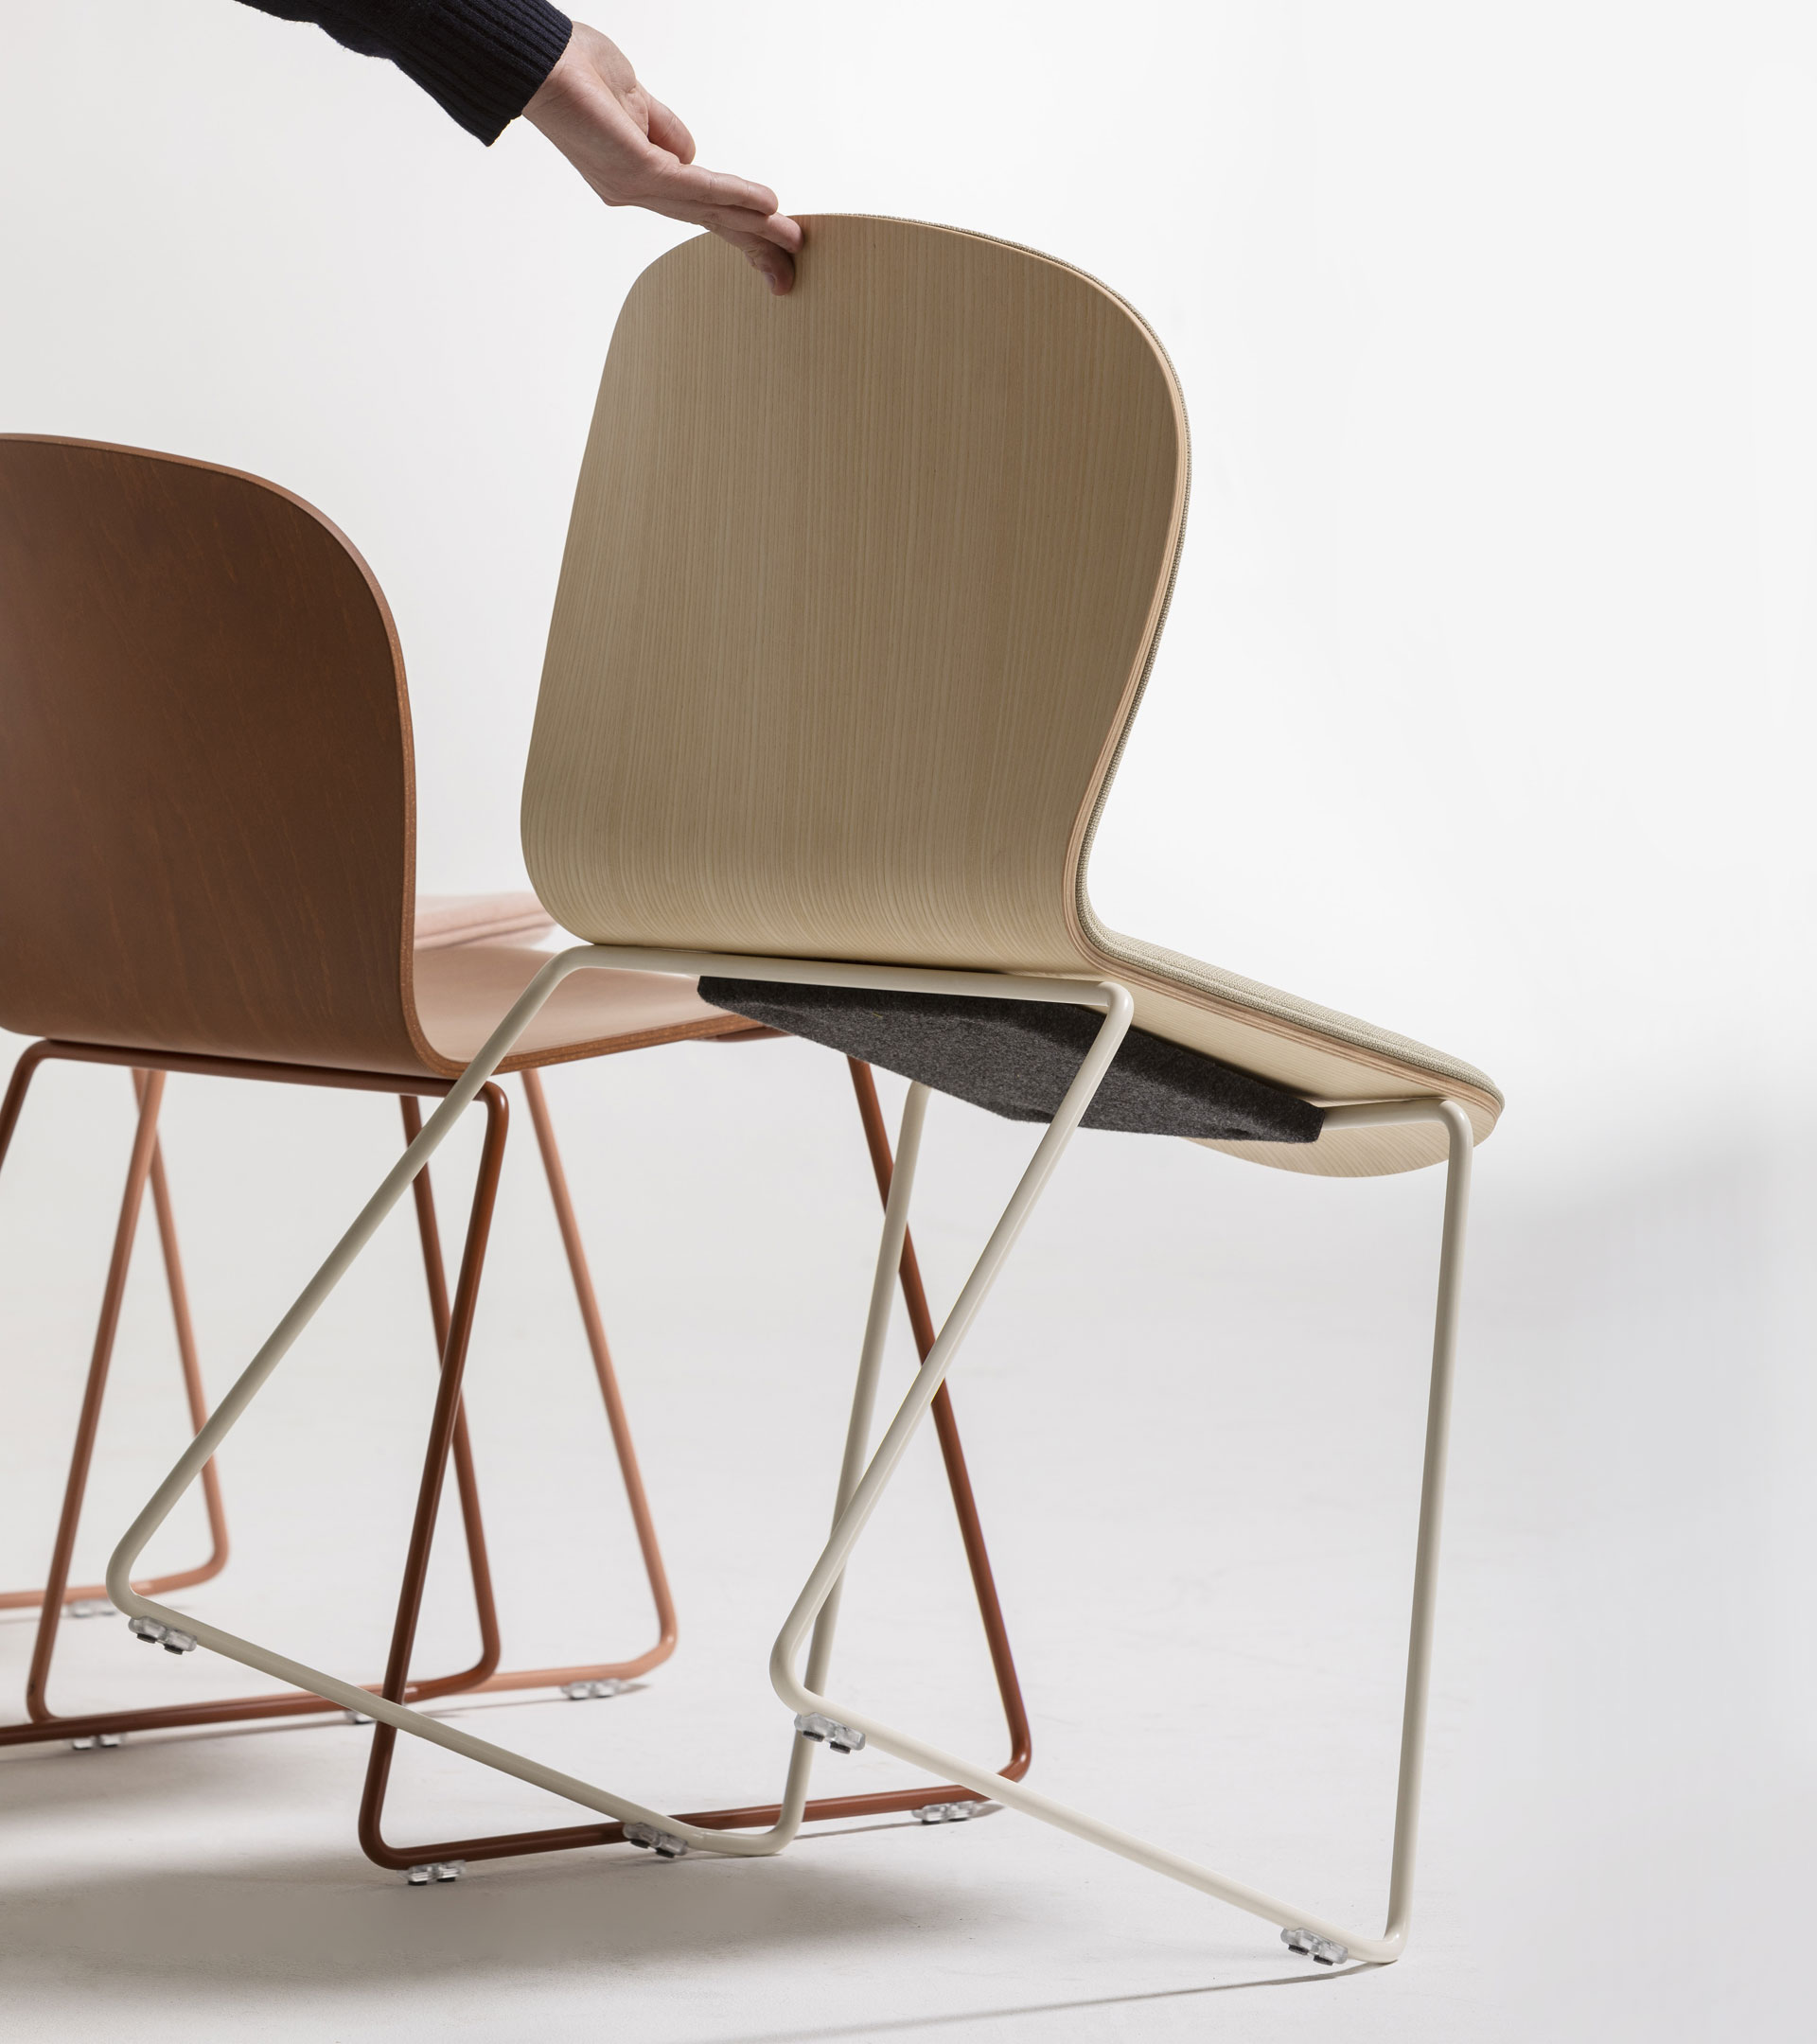 Ona chair with wooden legs - Vergés